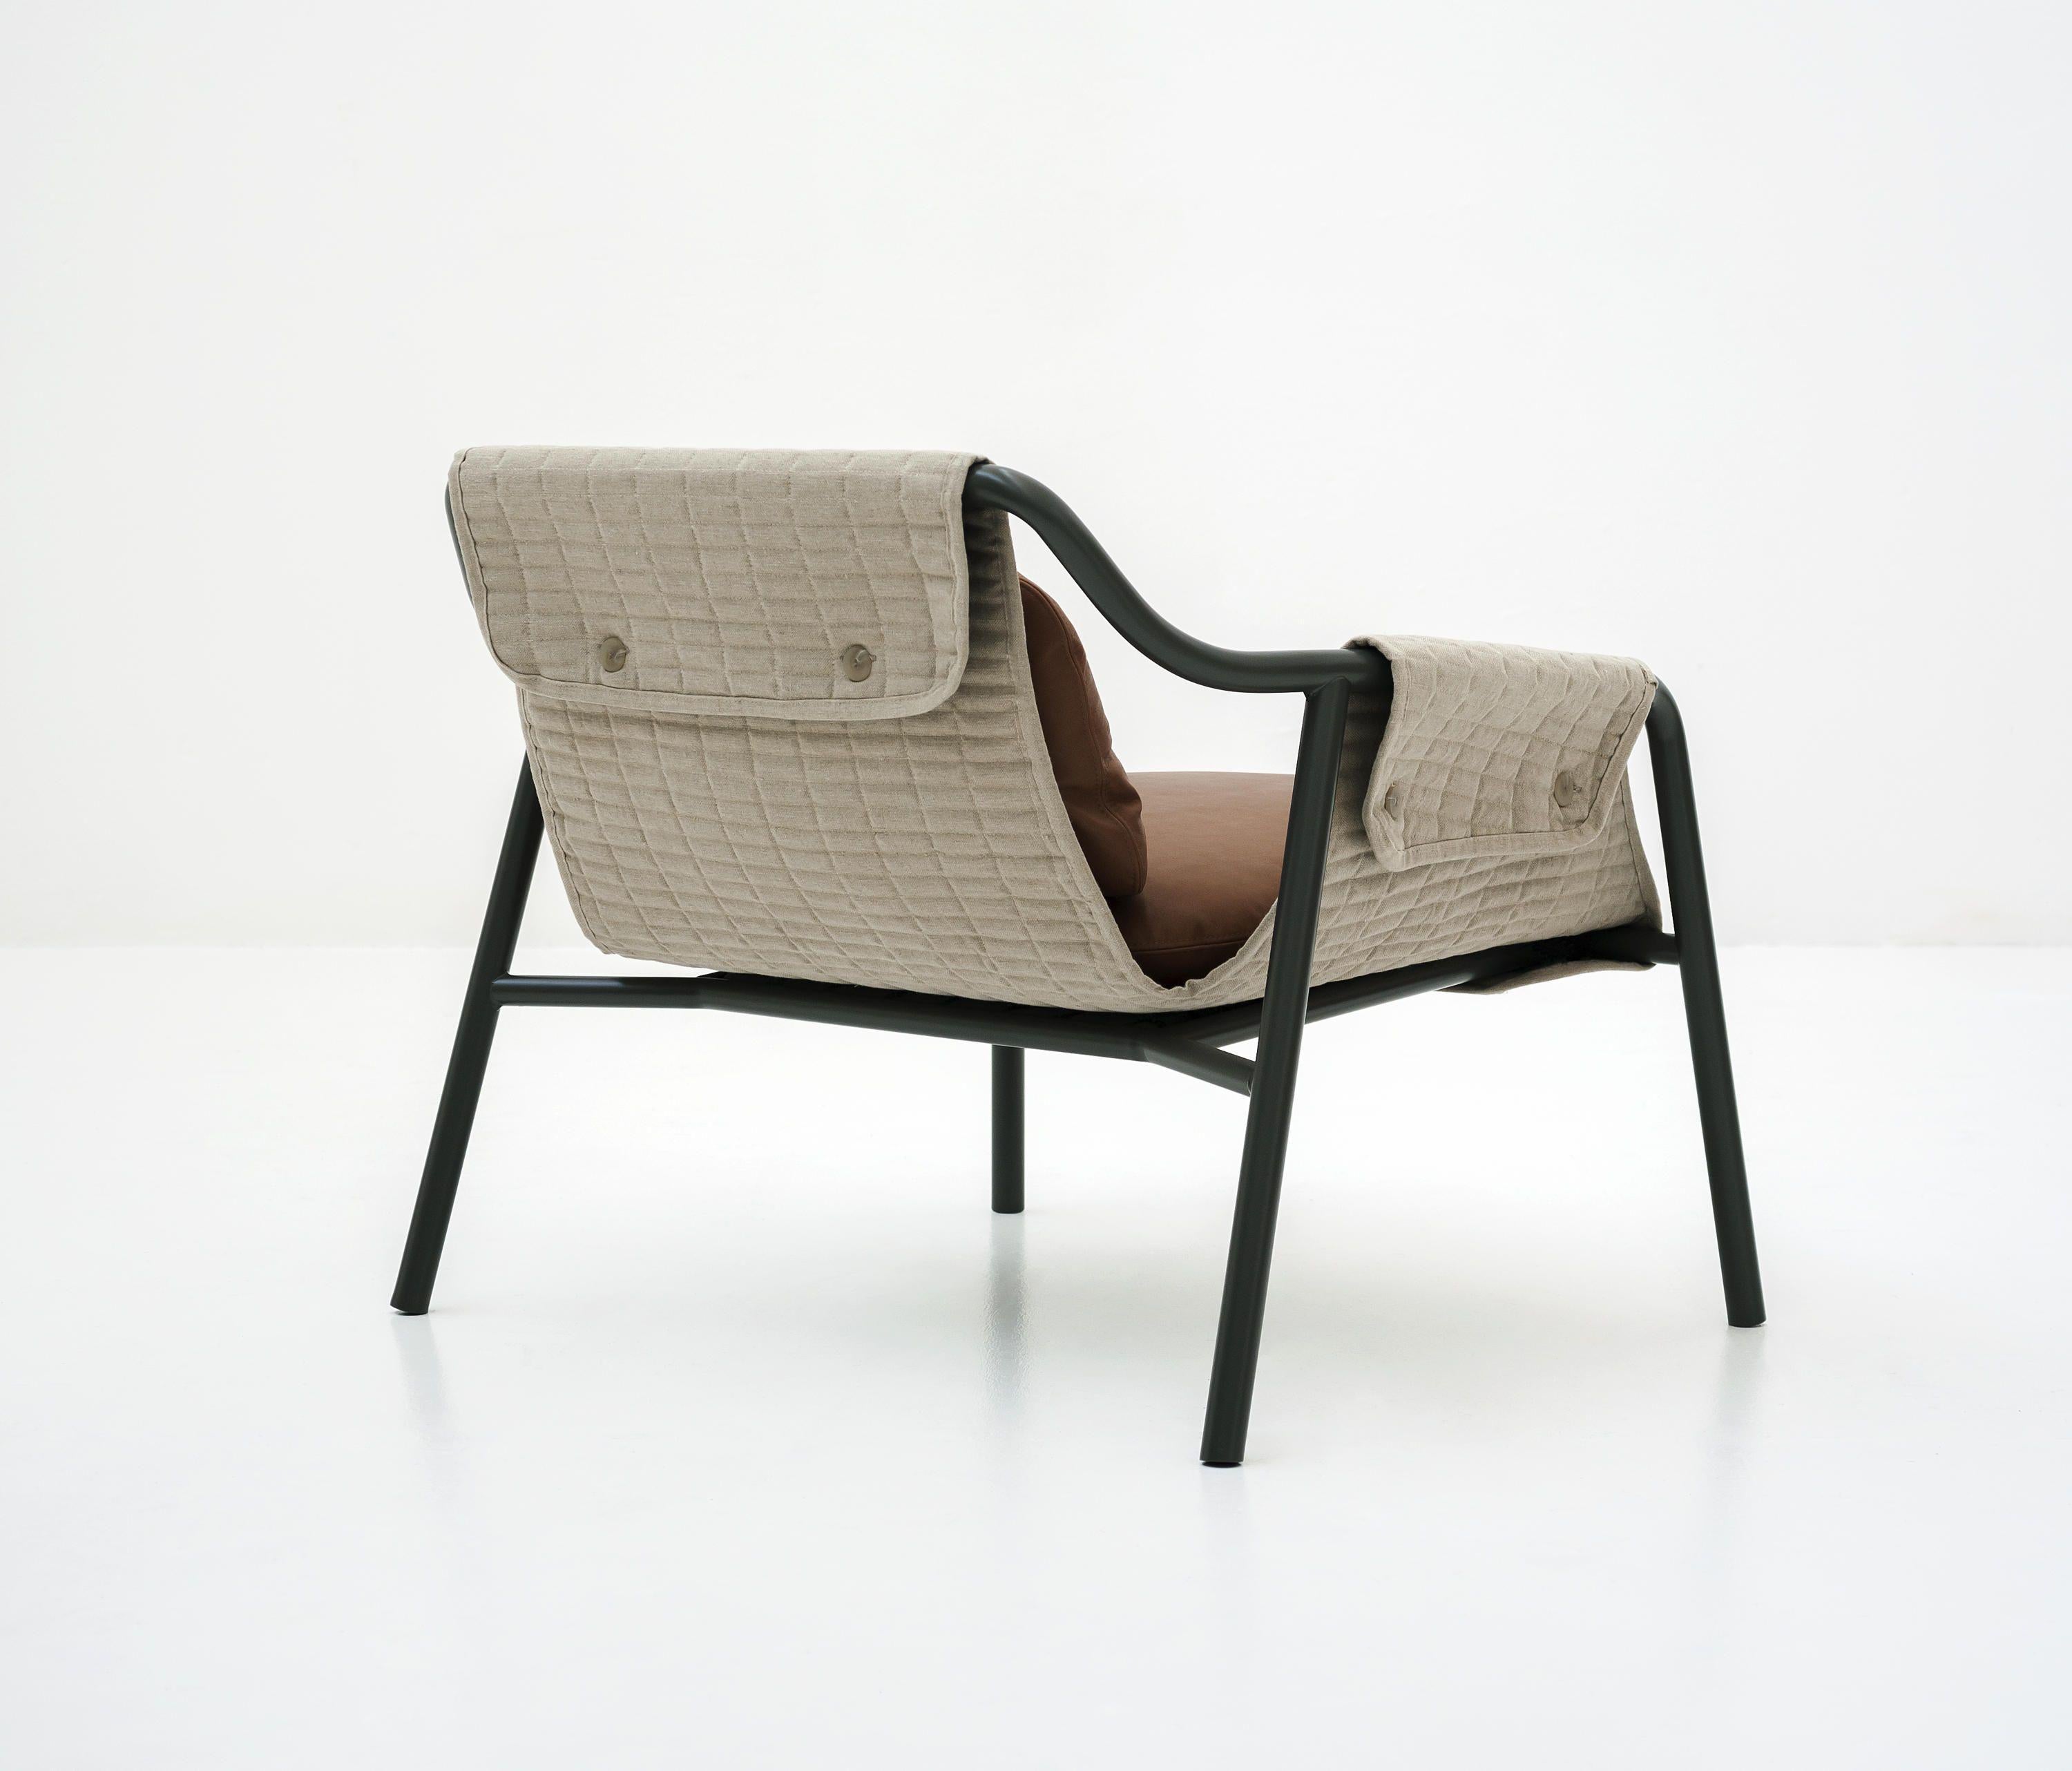 Contemporary Tacchini Jacket Armchair Designed by Patrick Norguet